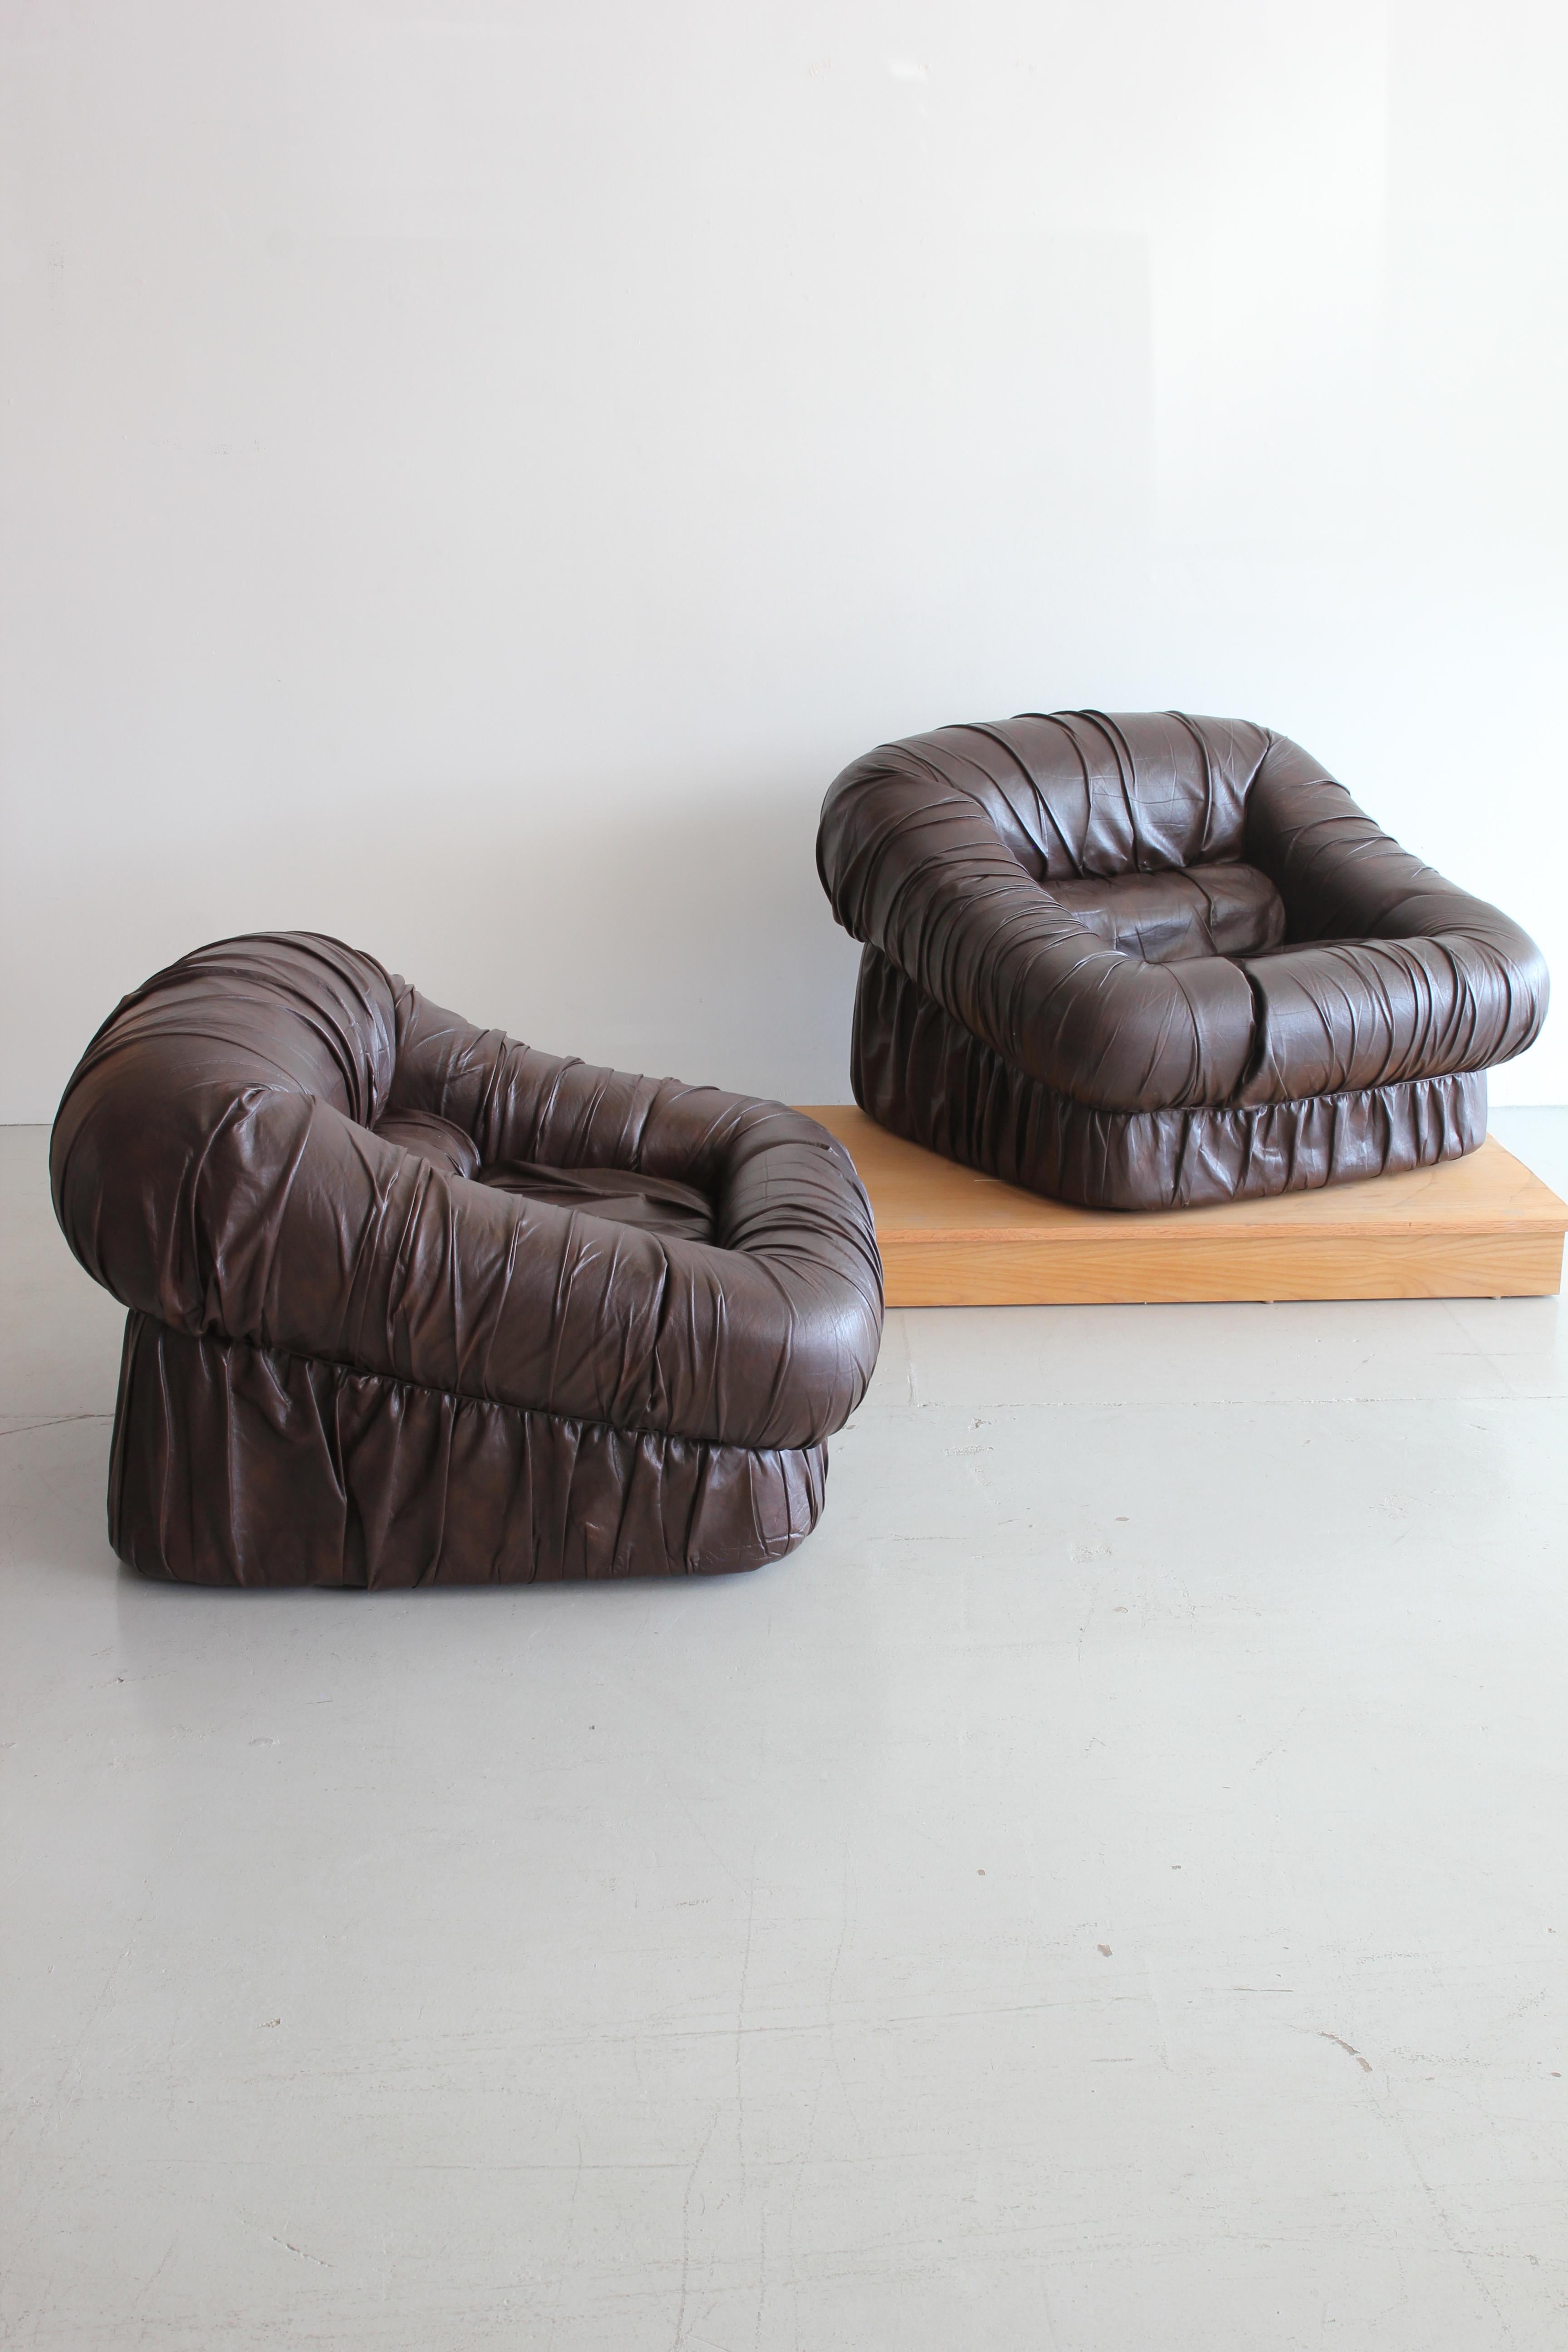 Italian Pair of Leather Club Chairs by De Pas, D'urbino and Lomazzi